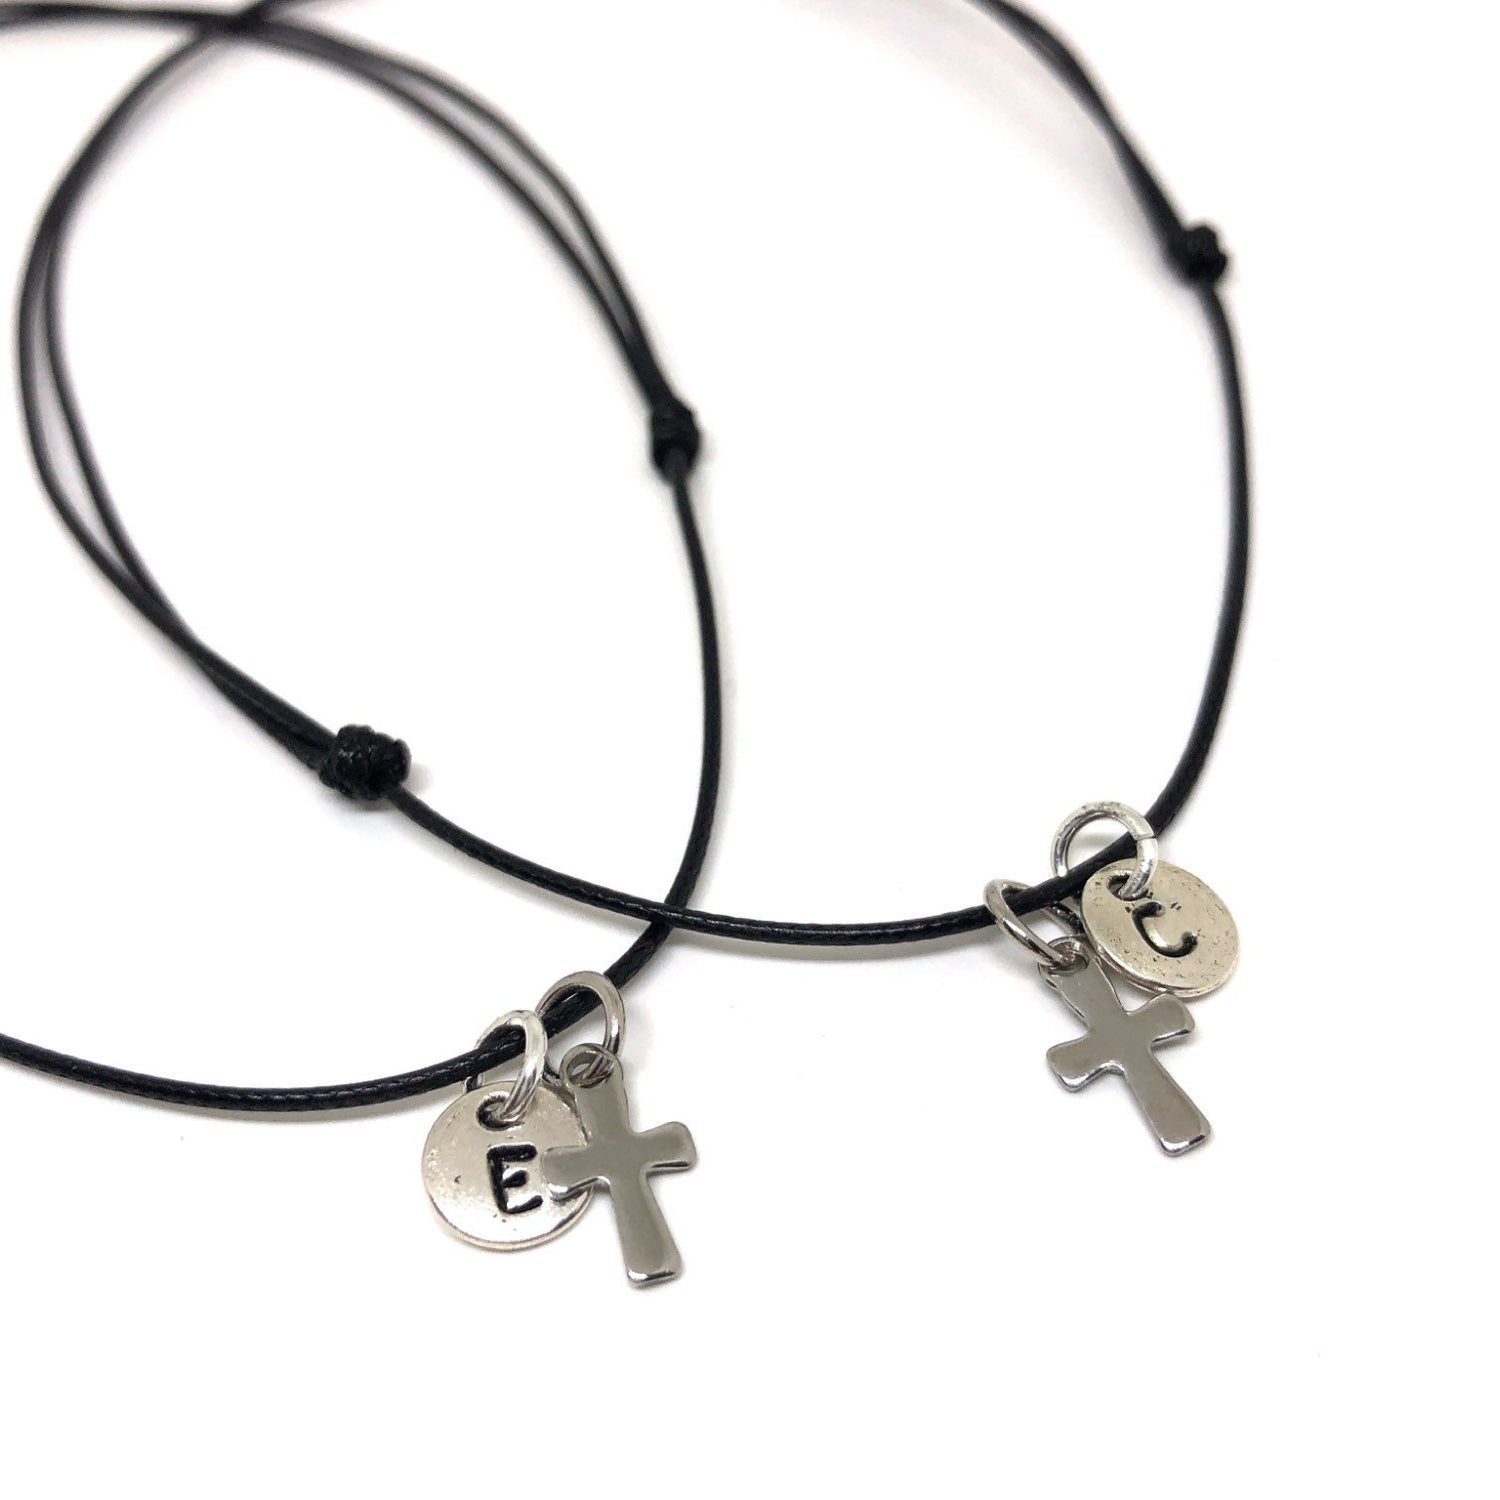 Couple Necklaces, Initials, Stainless Steel Cross Necklaces, Adjustable